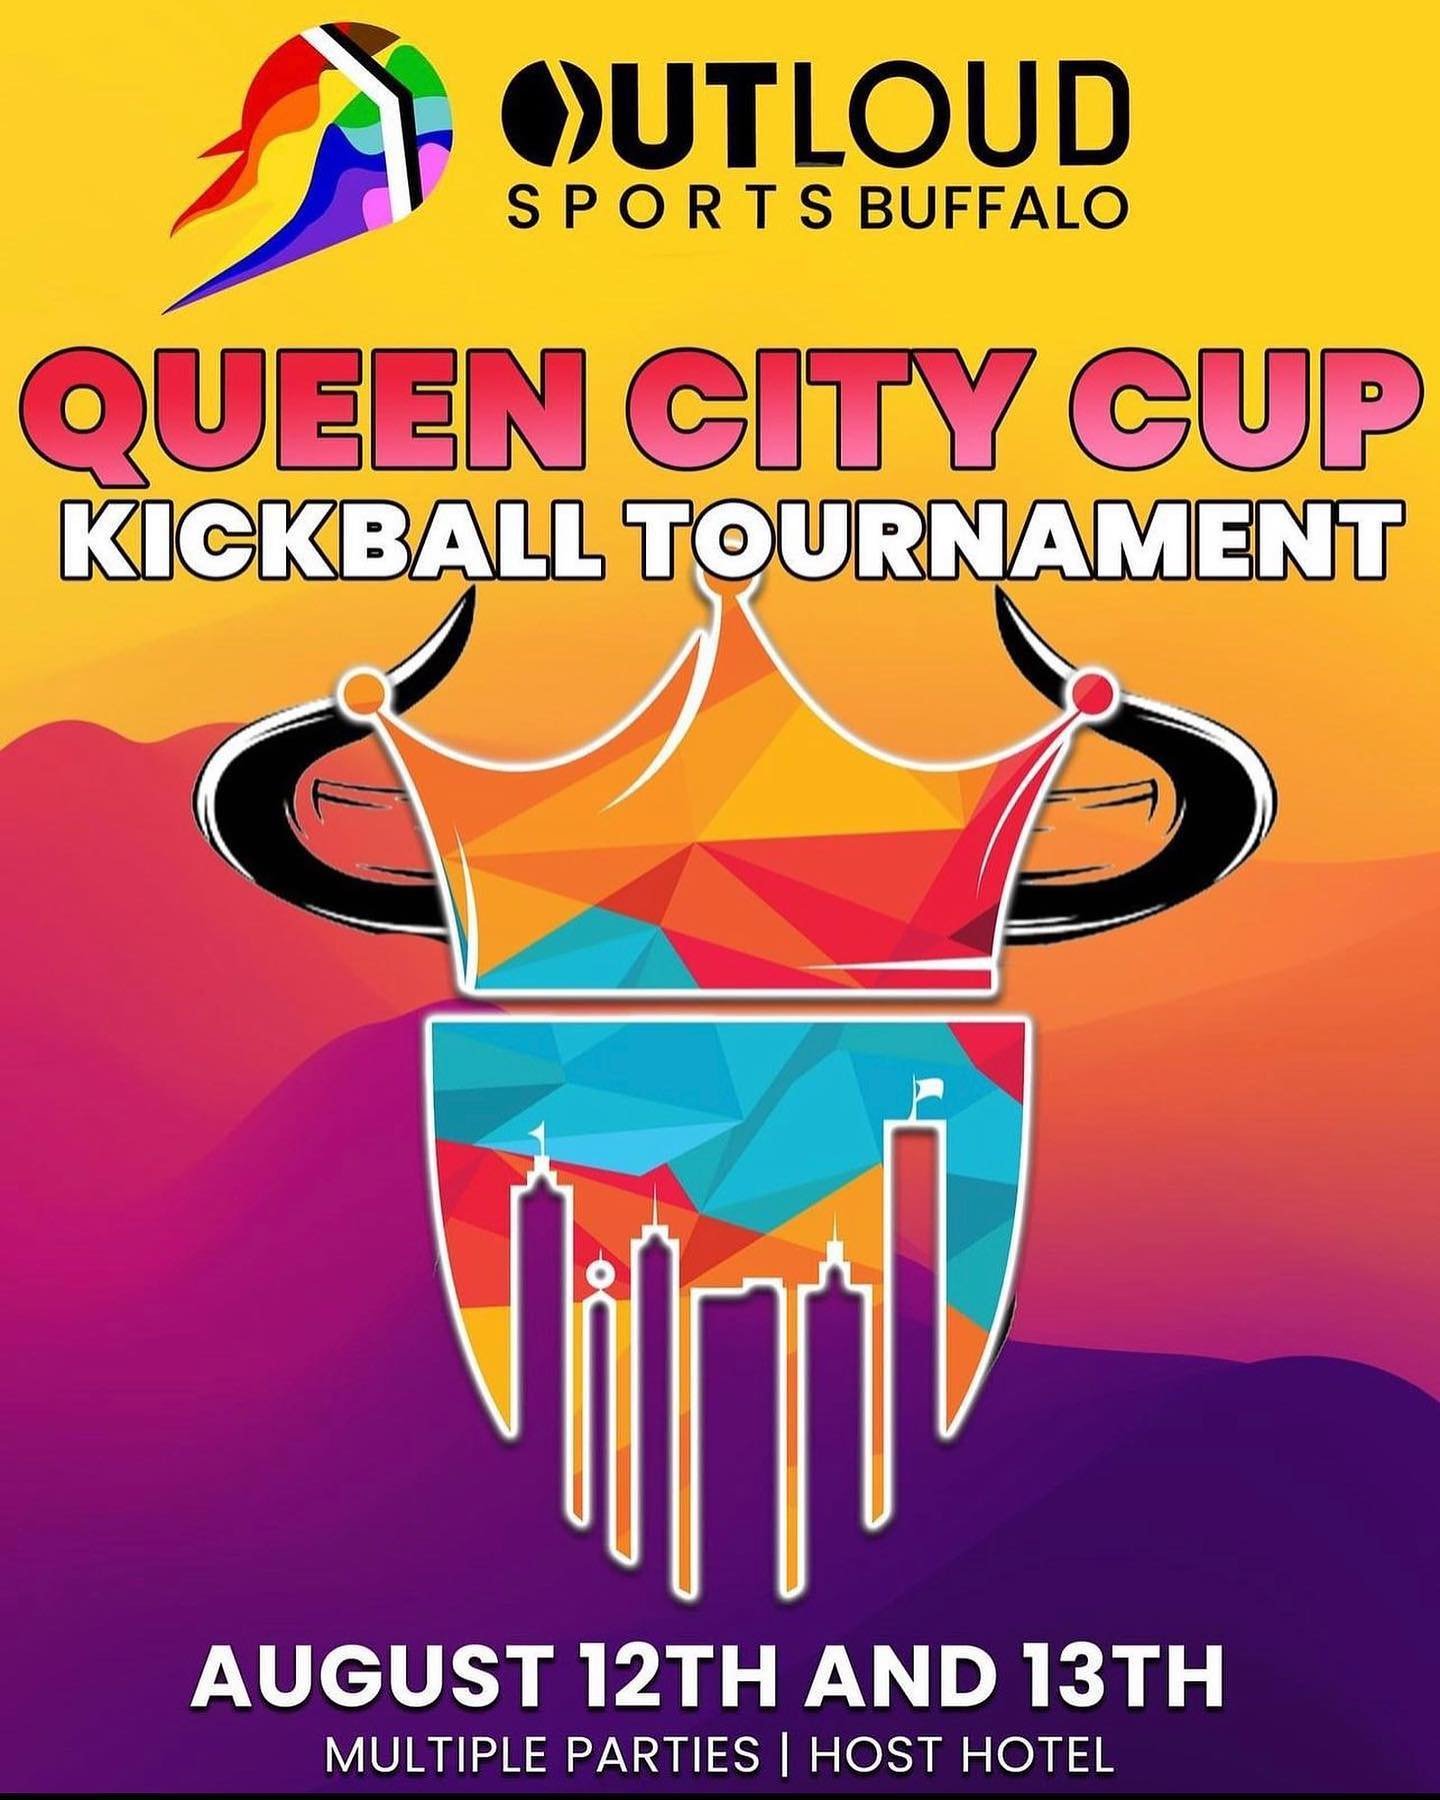 Have you registered your team yet for this year&rsquo;s Buffalo TOURNAMENT!?!?! It&rsquo;s so close, we&rsquo;d love to see Rochester representing their city! 

It's August 12th and 13th and right down the street!!! 

 This is a chance to make new fr